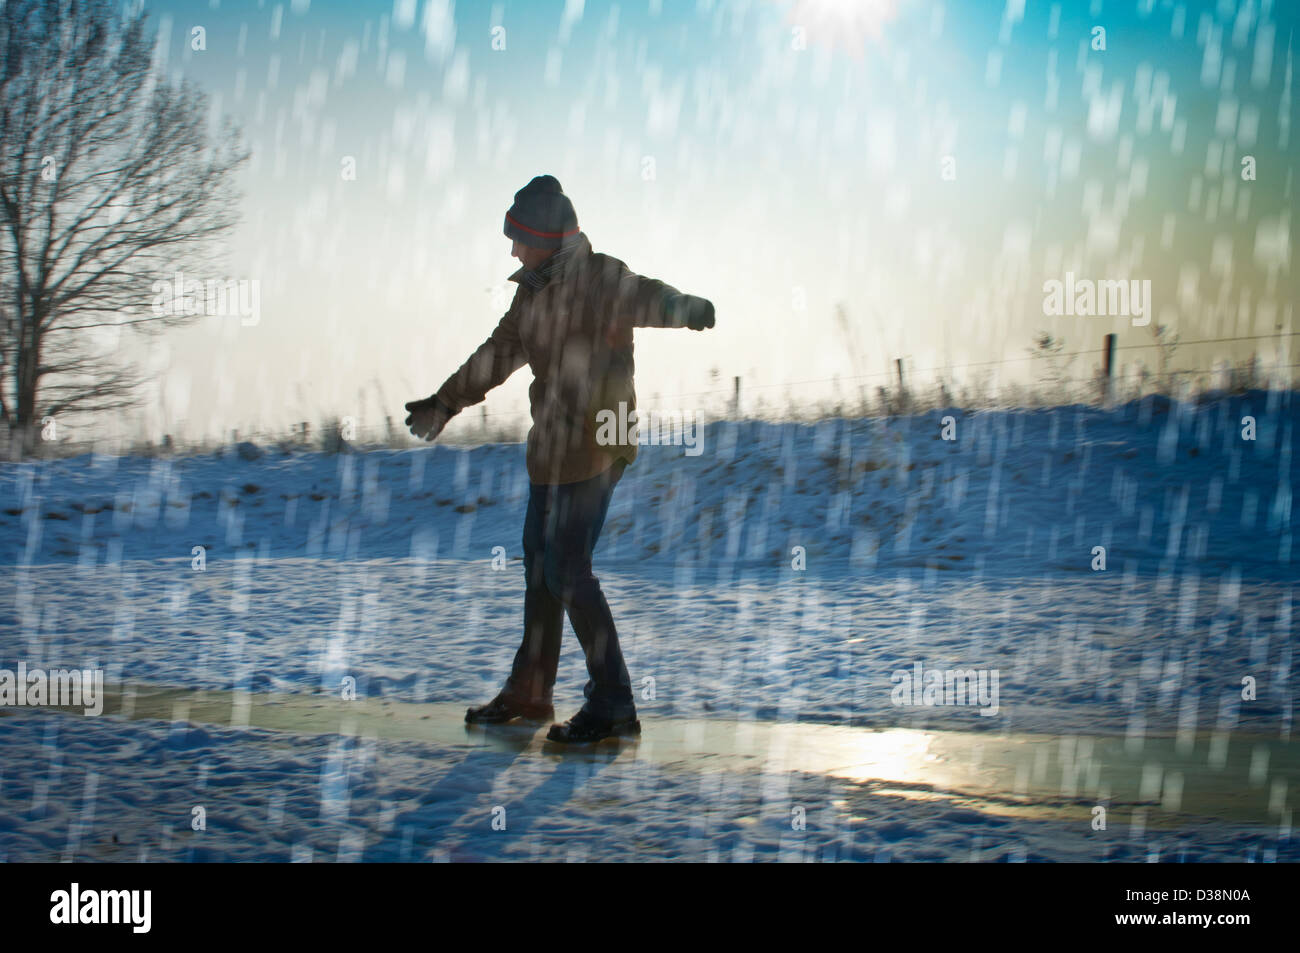 Man playing in snow Stock Photo